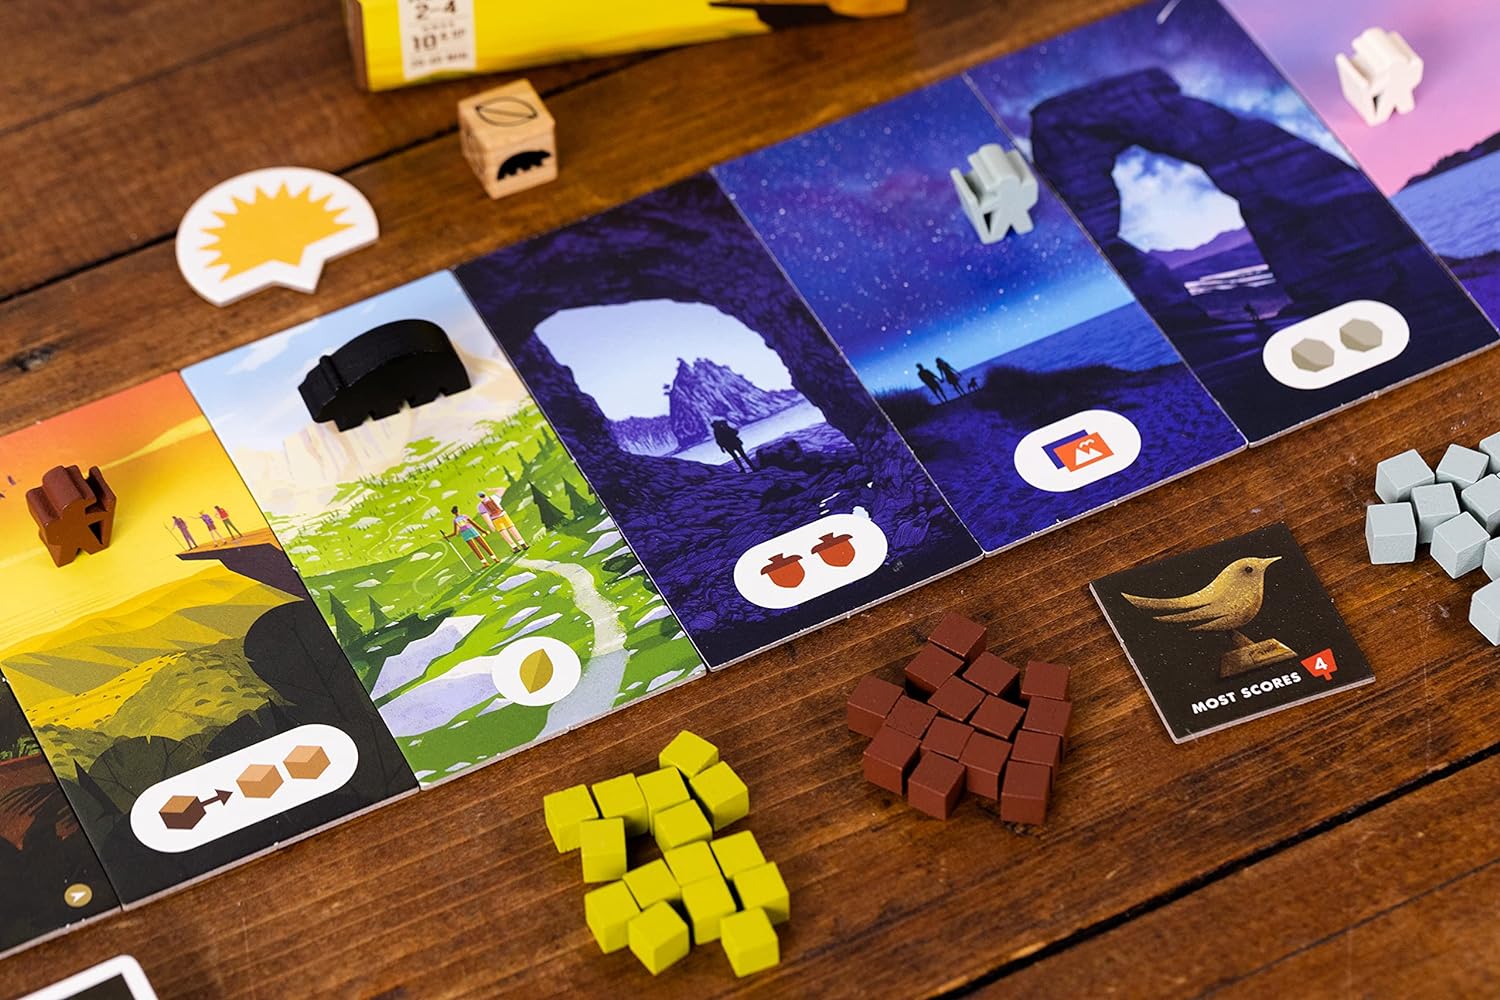 Trails, a Family and Strategy Board Game About Hiking and Outdoors by Keymaster, 2-4 players